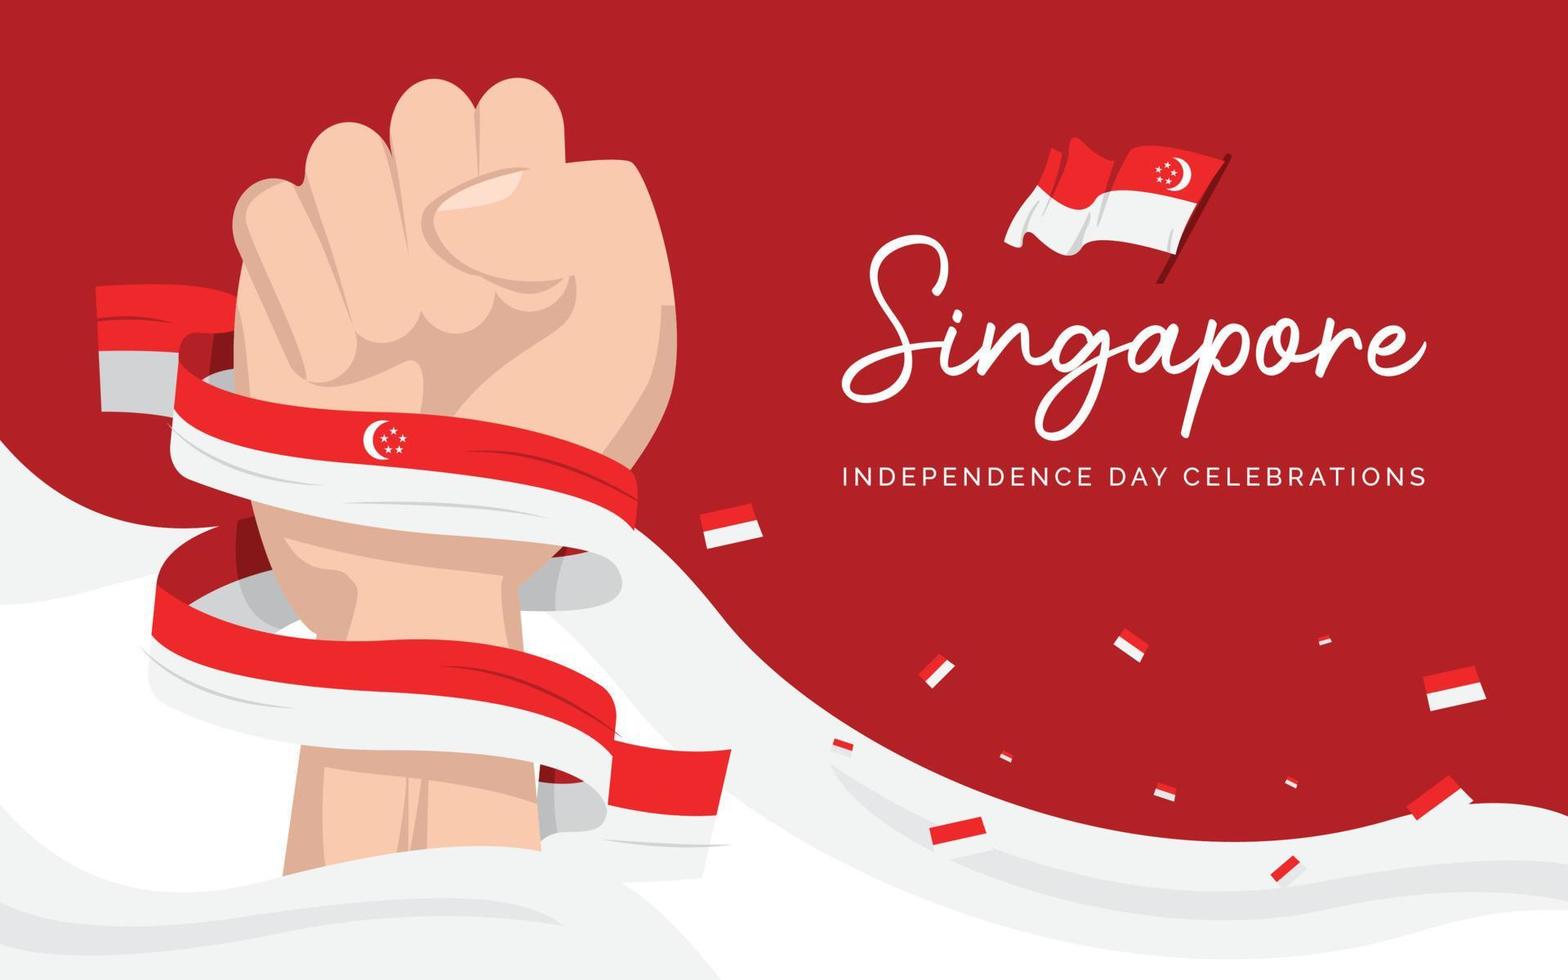 Singapore independence day banner design template vector